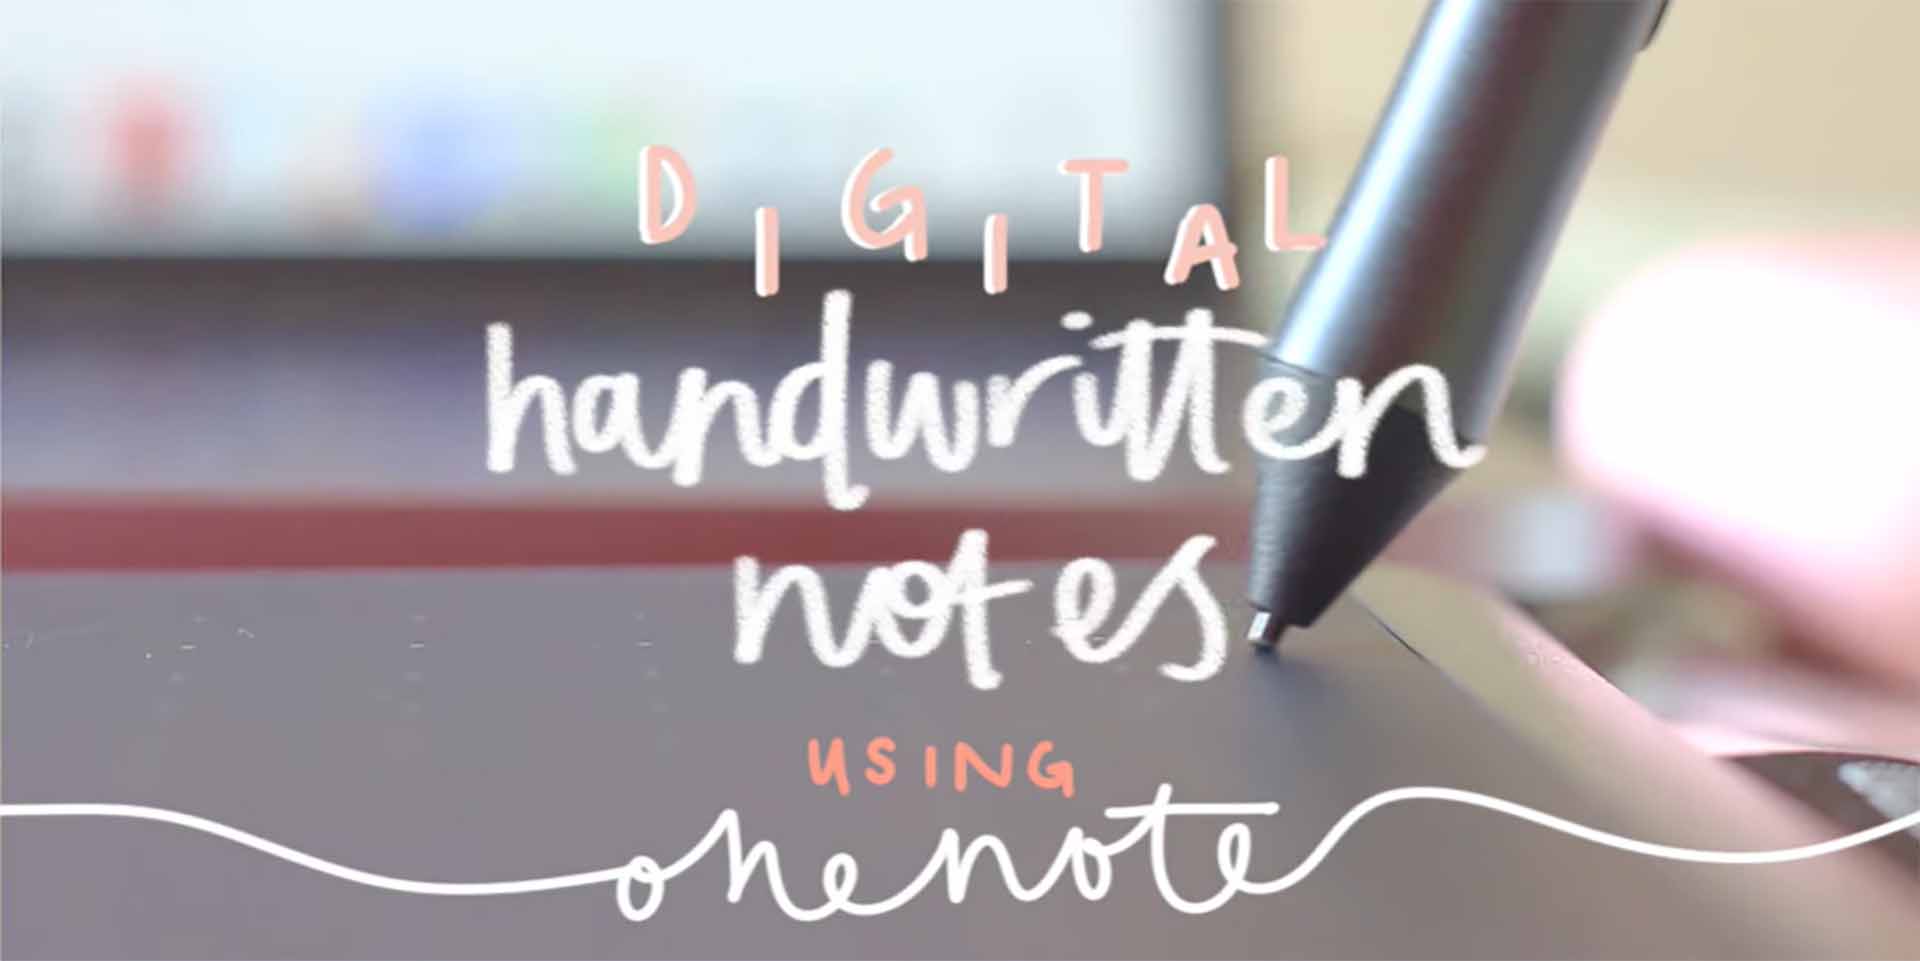 Digital notes OneNote feature image